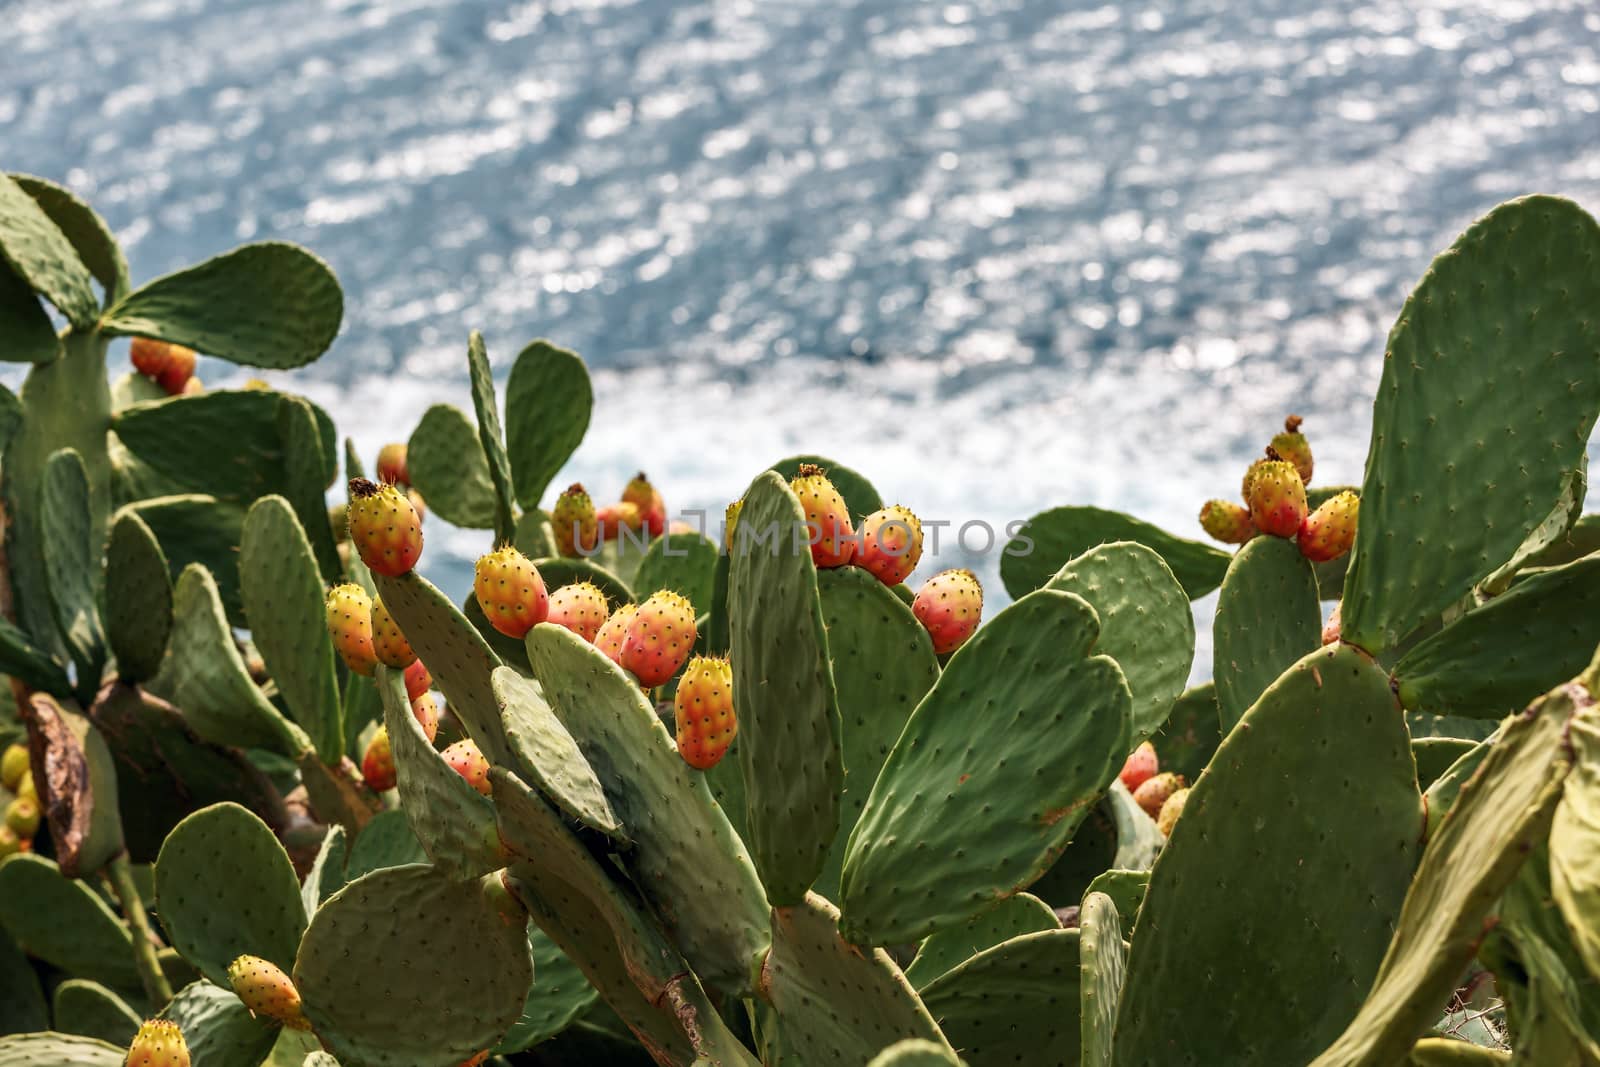 flowering cactus on the coast, overlooking the sea by seka33